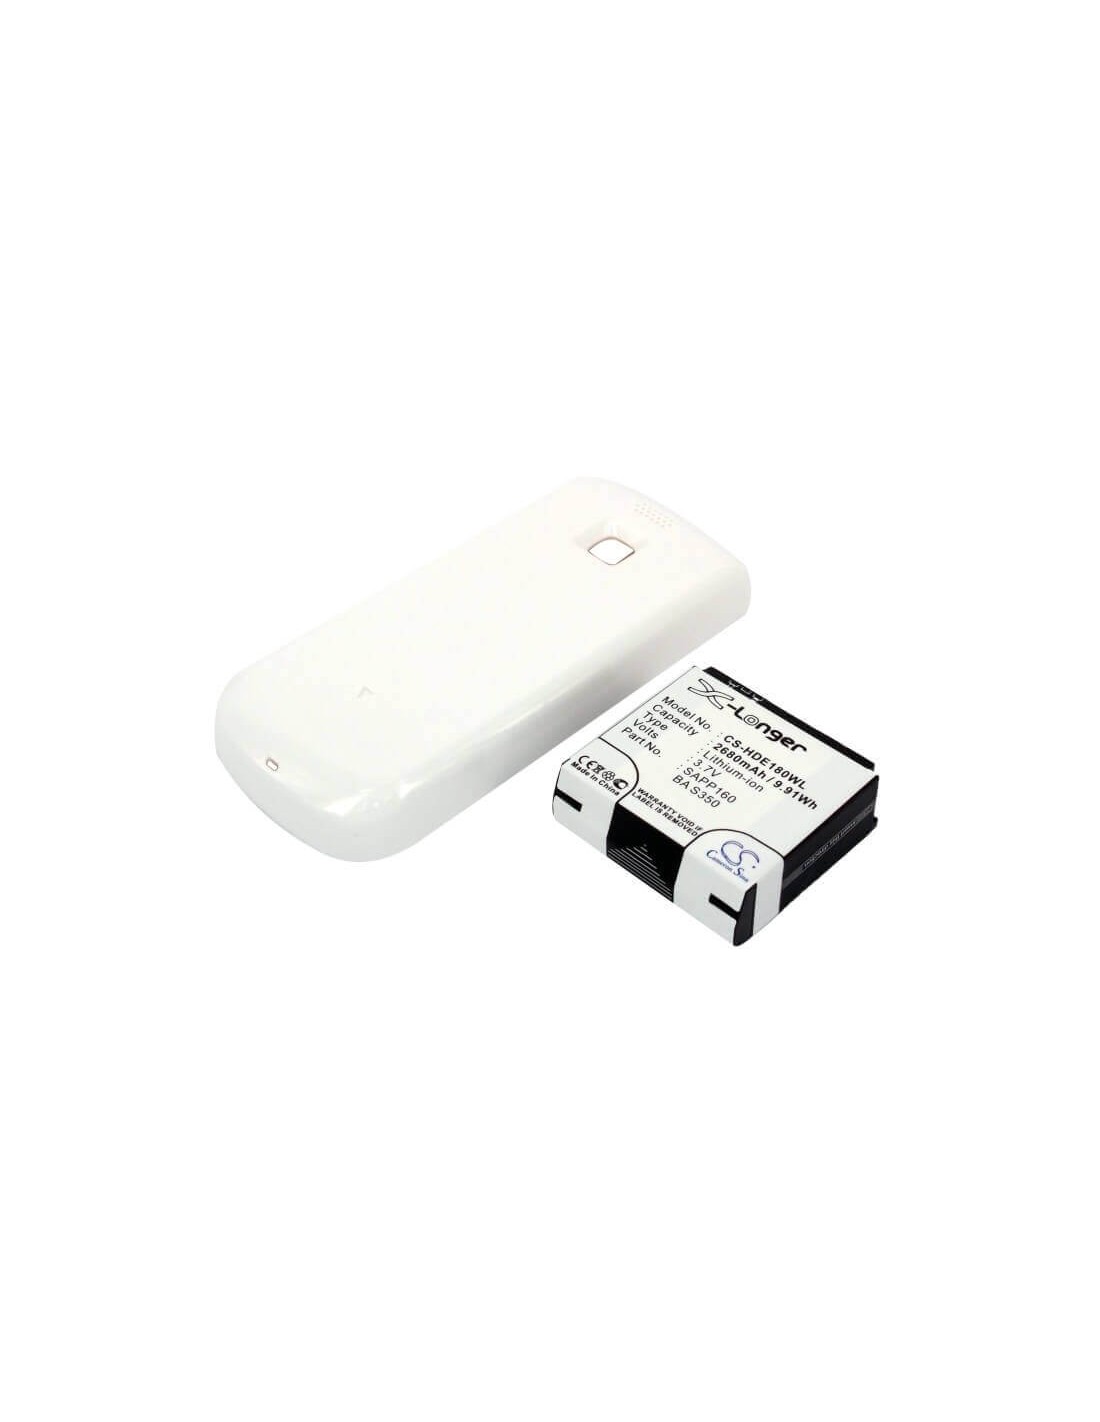 Battery for HTC Magic, A6161, Sapphire, white back cover 3.7V, 2680mAh - 9.92Wh